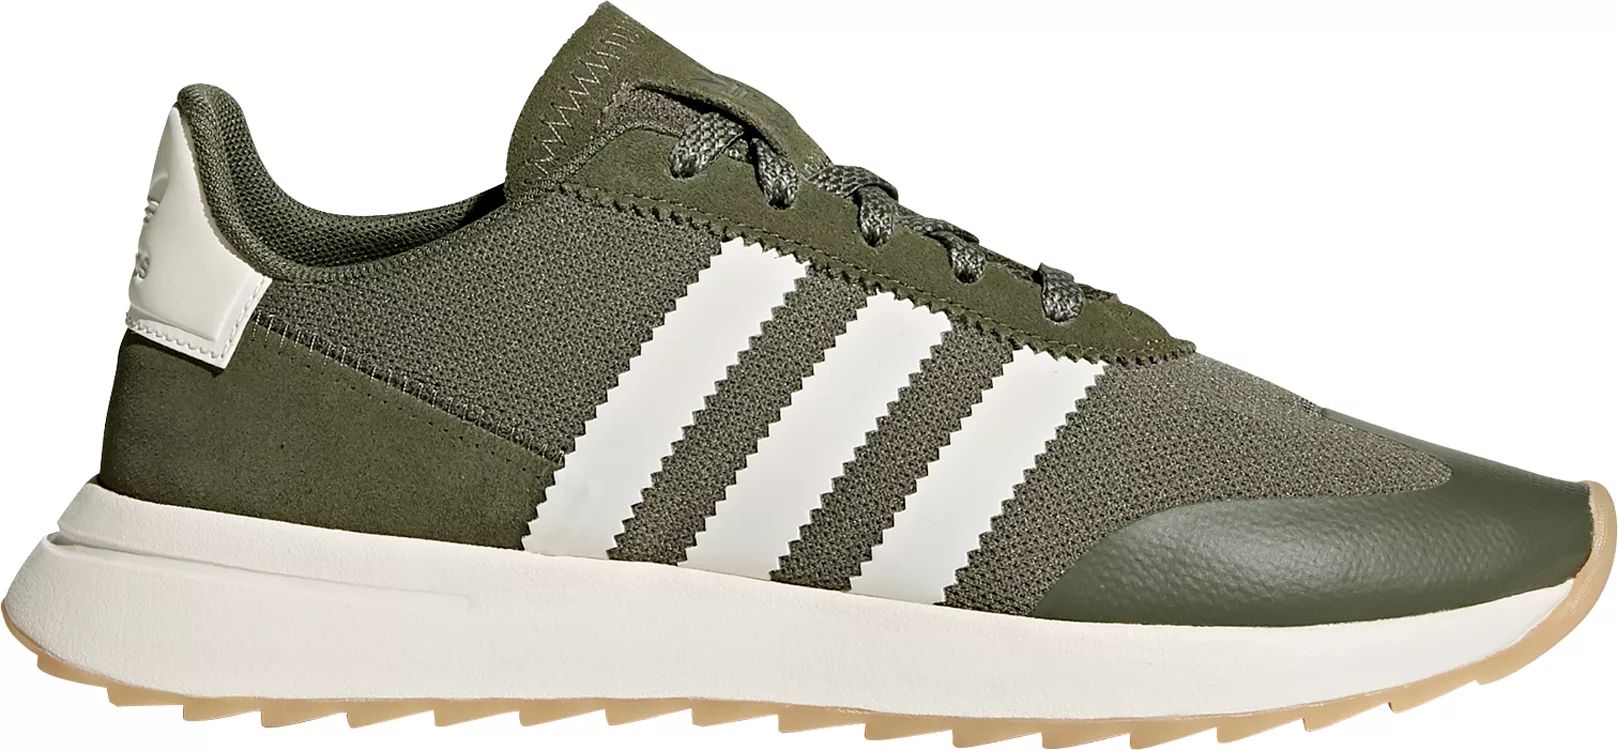 adidas Originals Women's Flashback Shoes, Size: 6.0, Green | Dick's Sporting Goods